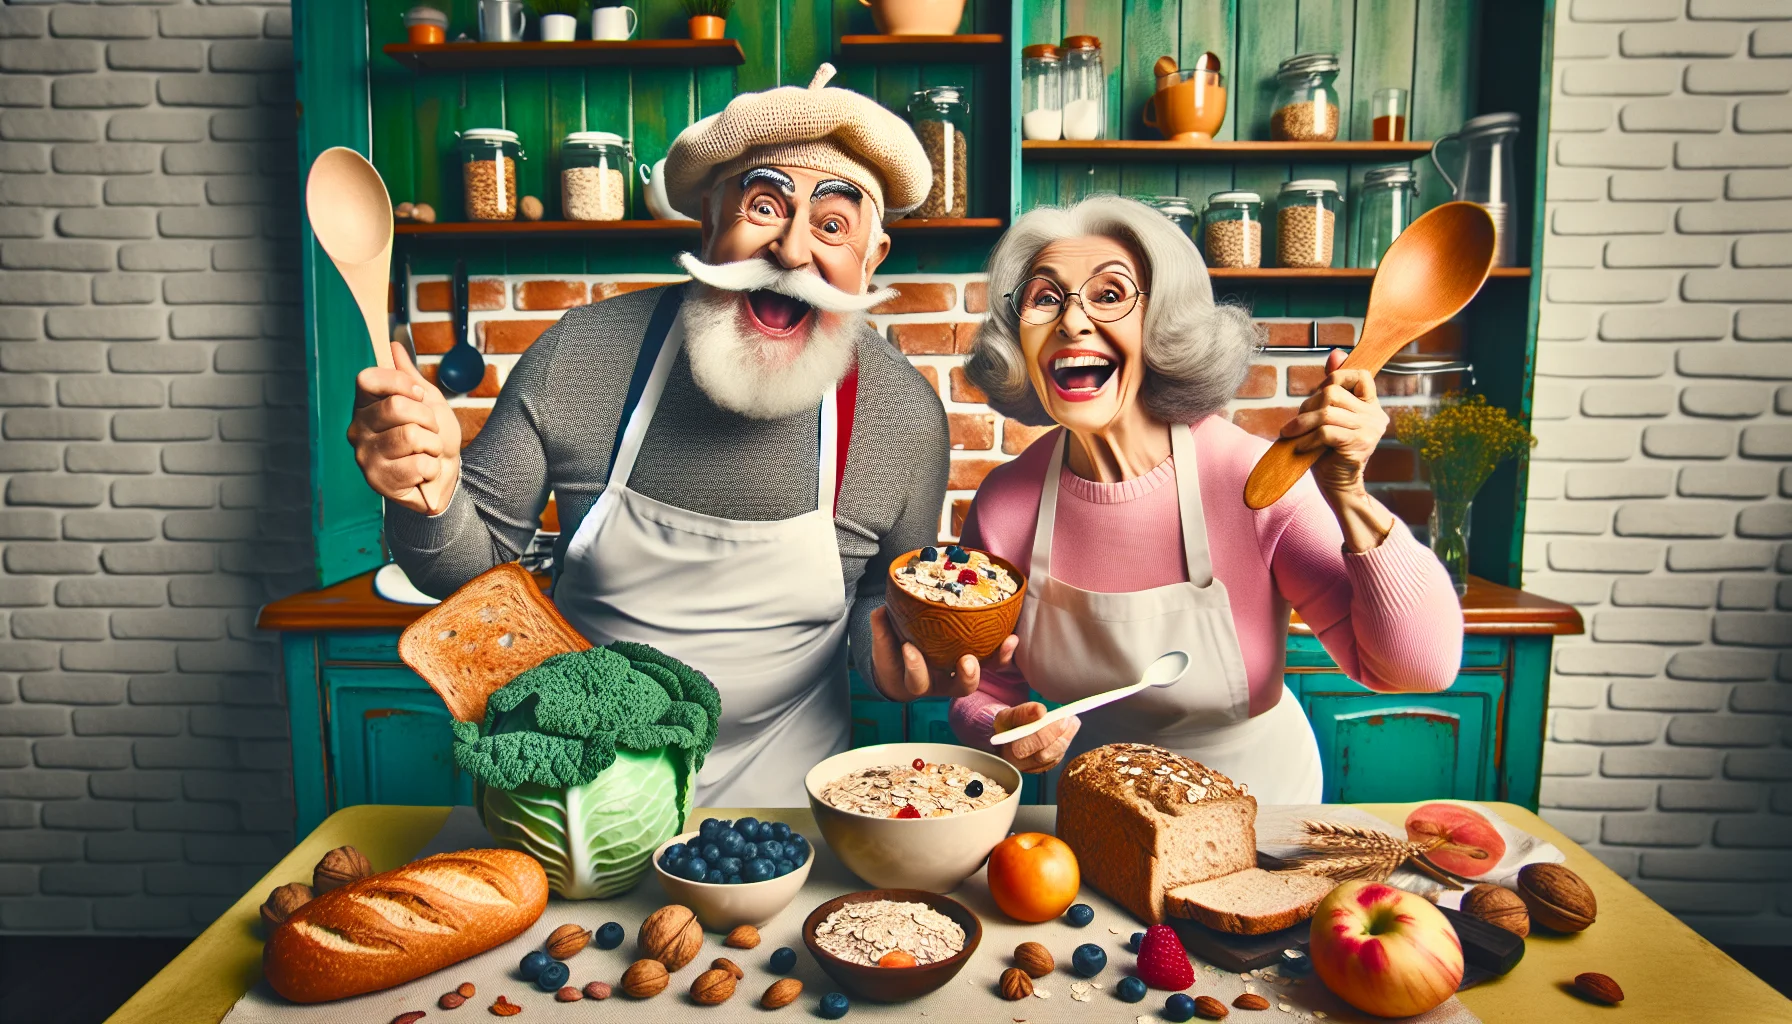 Imagine a humorous scene in a vibrant, retro-style kitchen. A spry elderly Hispanic man and a lively elderly Caucasian woman are preparing breakfast together. They have a grand assortment of fiber-rich foods laid out on their kitchen table - an array of oatmeal, whole grain bread, berries, and nuts. The man is playfully wearing a beret made from a cabbage, a symbol of healthy diet, while the woman holds a large spoon and an oversized bowl as if they are gearing up for a giggle-inducing feast. Their faces are gleaming with joy as they try to incorporate healthy eating habits into their daily routines.